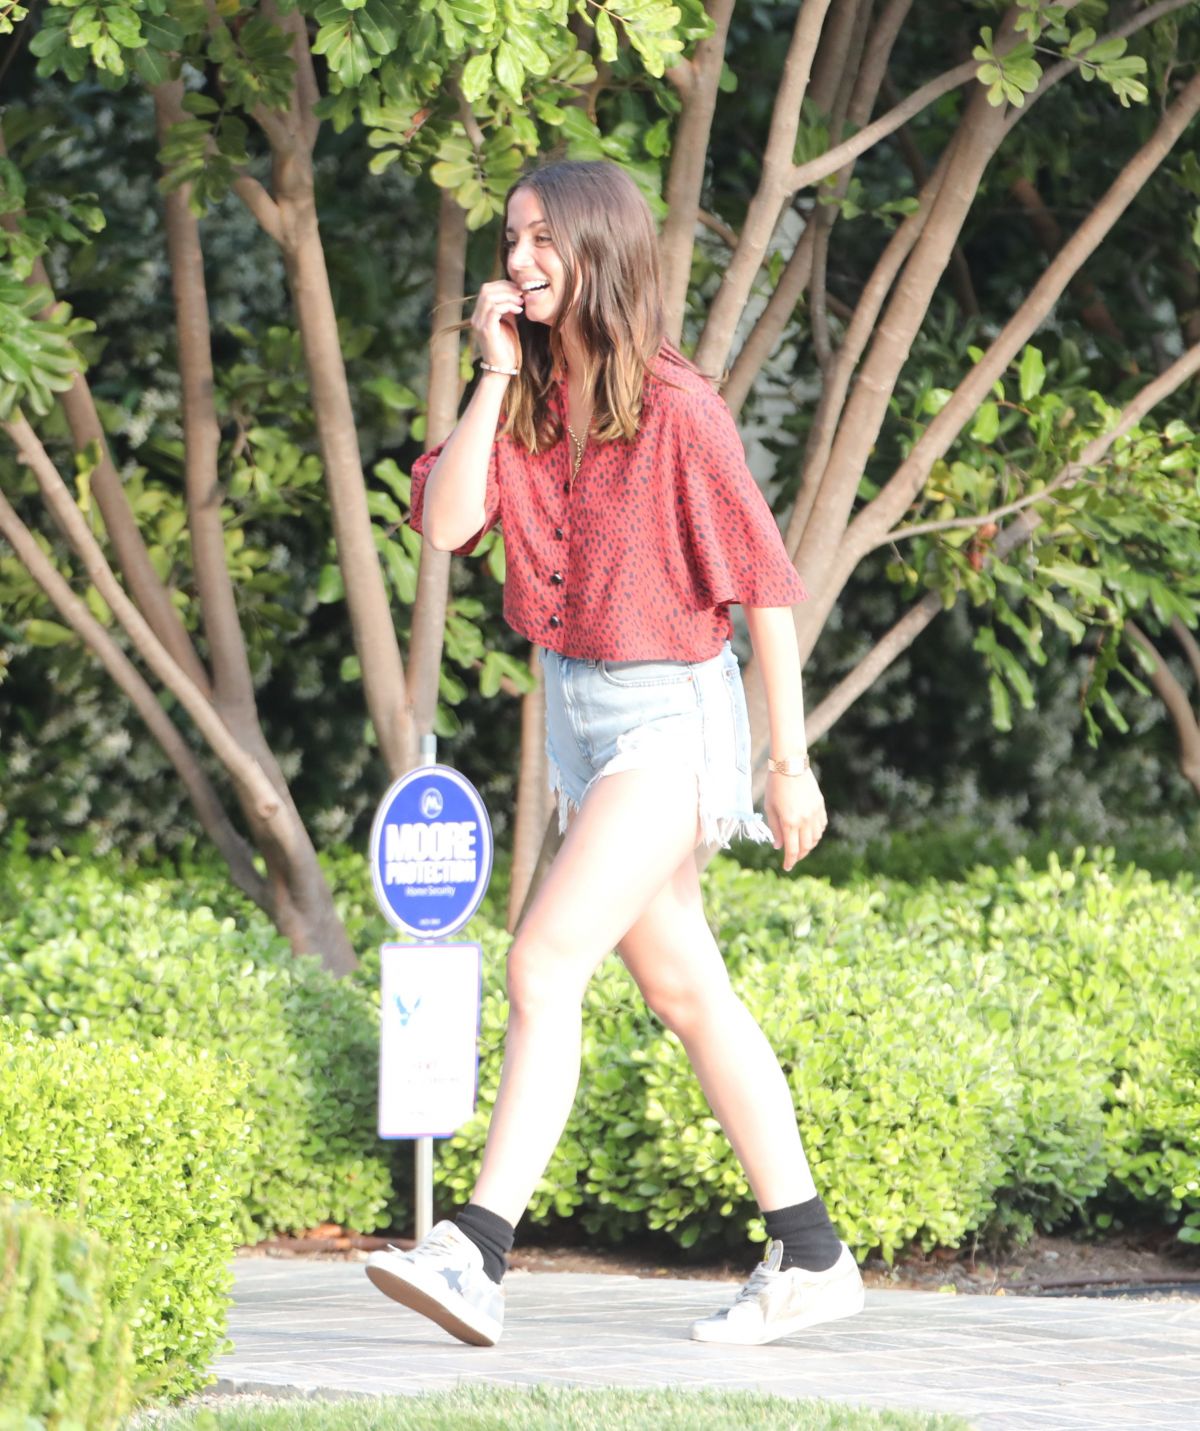 Ana De Armas seen in Beautiful Top and Denim Out in Brentwood 2020/06/04